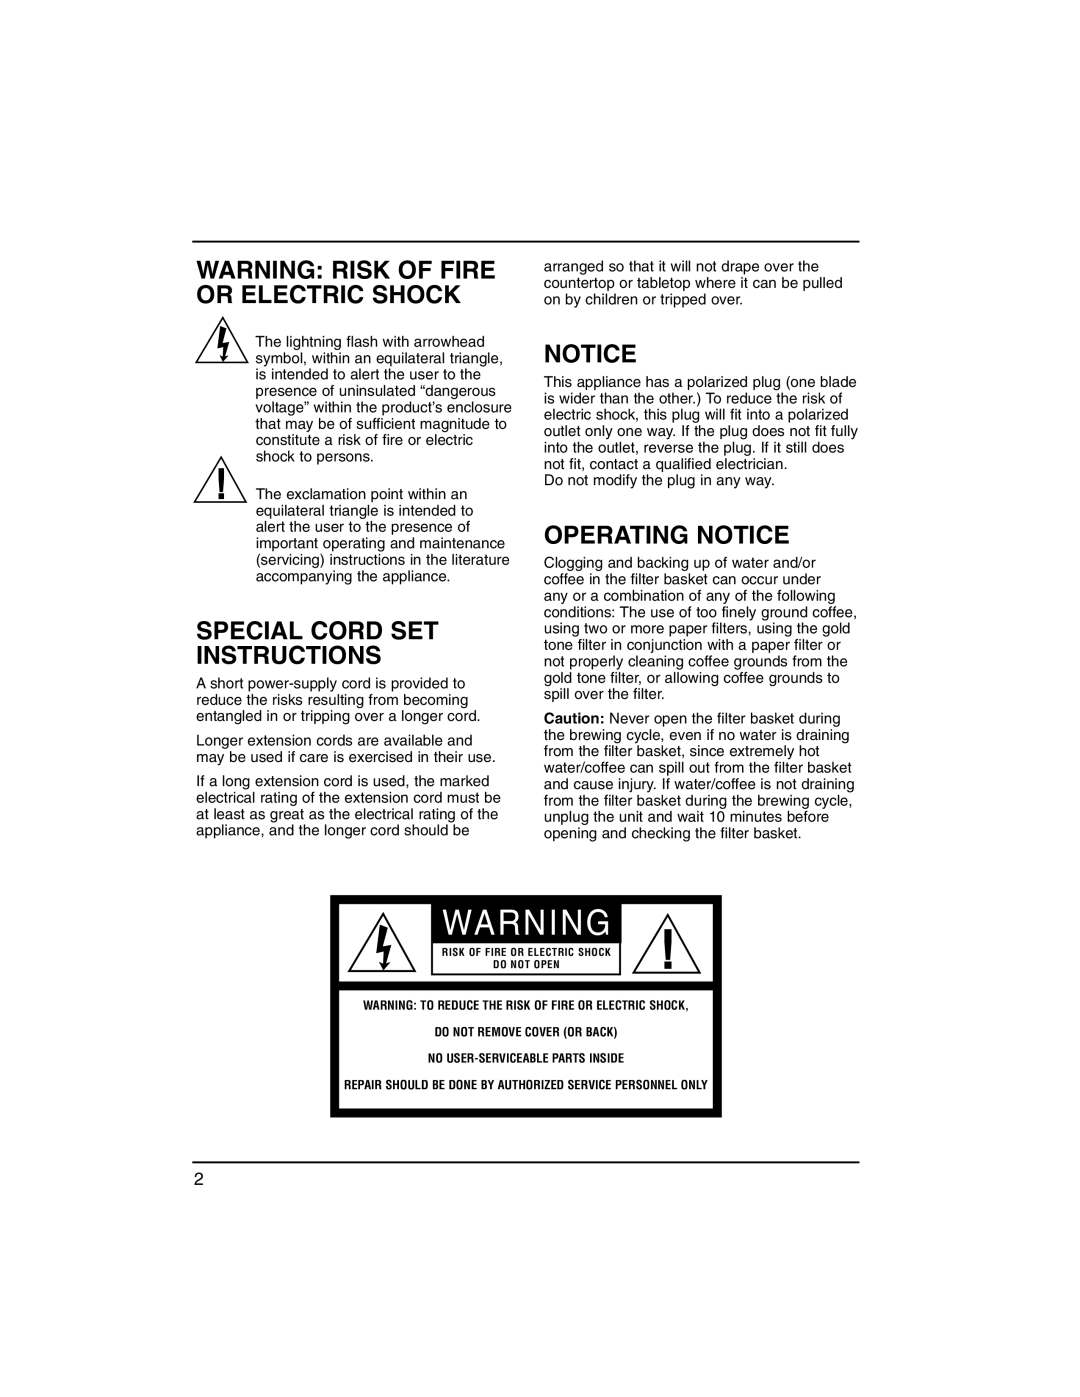 Cuisinart dgb500 manual Warning Risk Of Fire Or Electric Shock, Special Cord Set Instructions, Operating Notice 